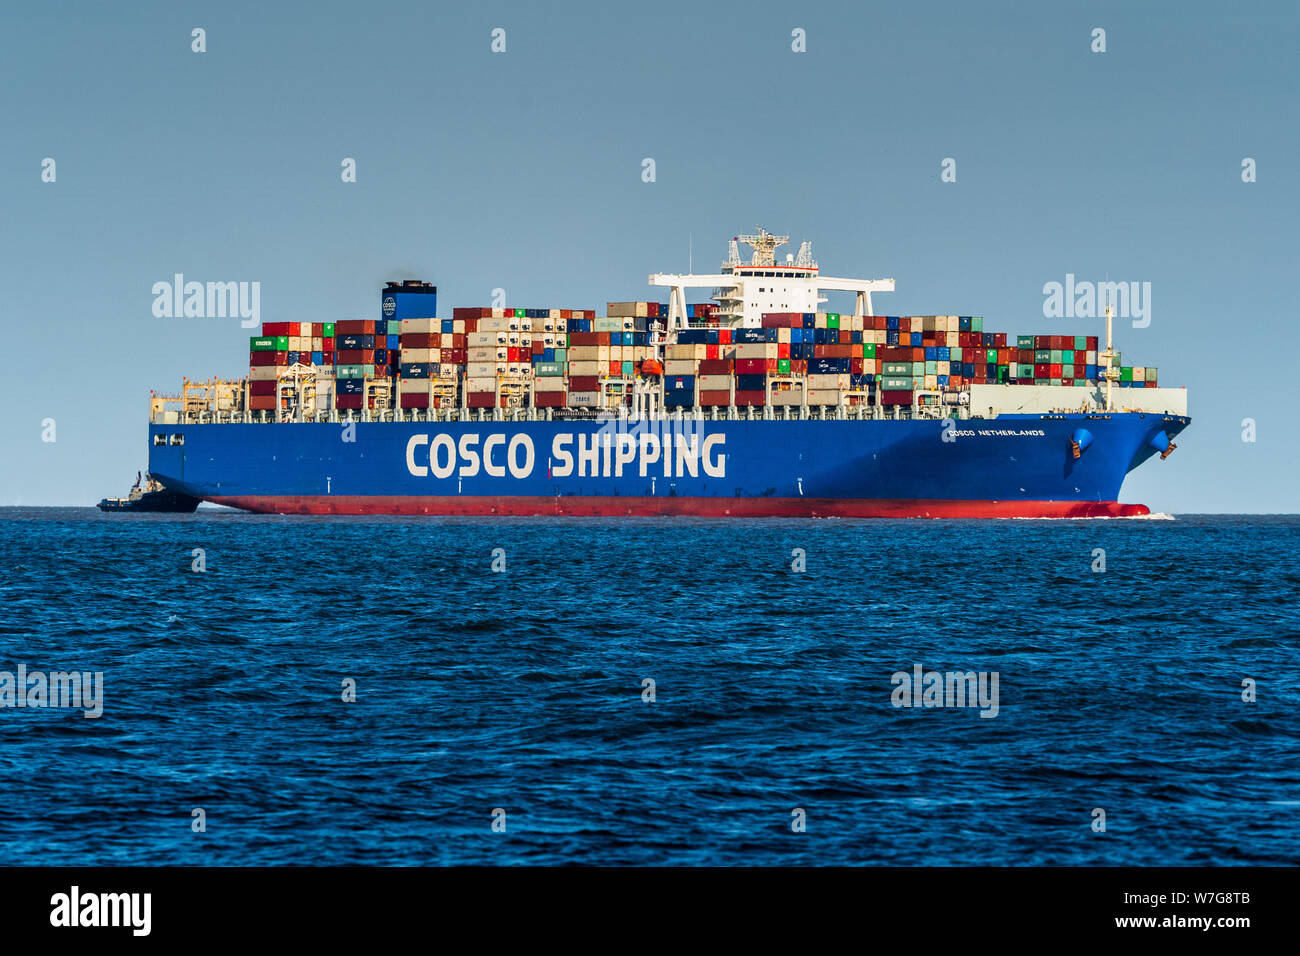 Cosco Netherlands Container Ship slowing as it approaches Felixstowe Port. COSCO is the China Ocean Shipping Company. Stock Photo